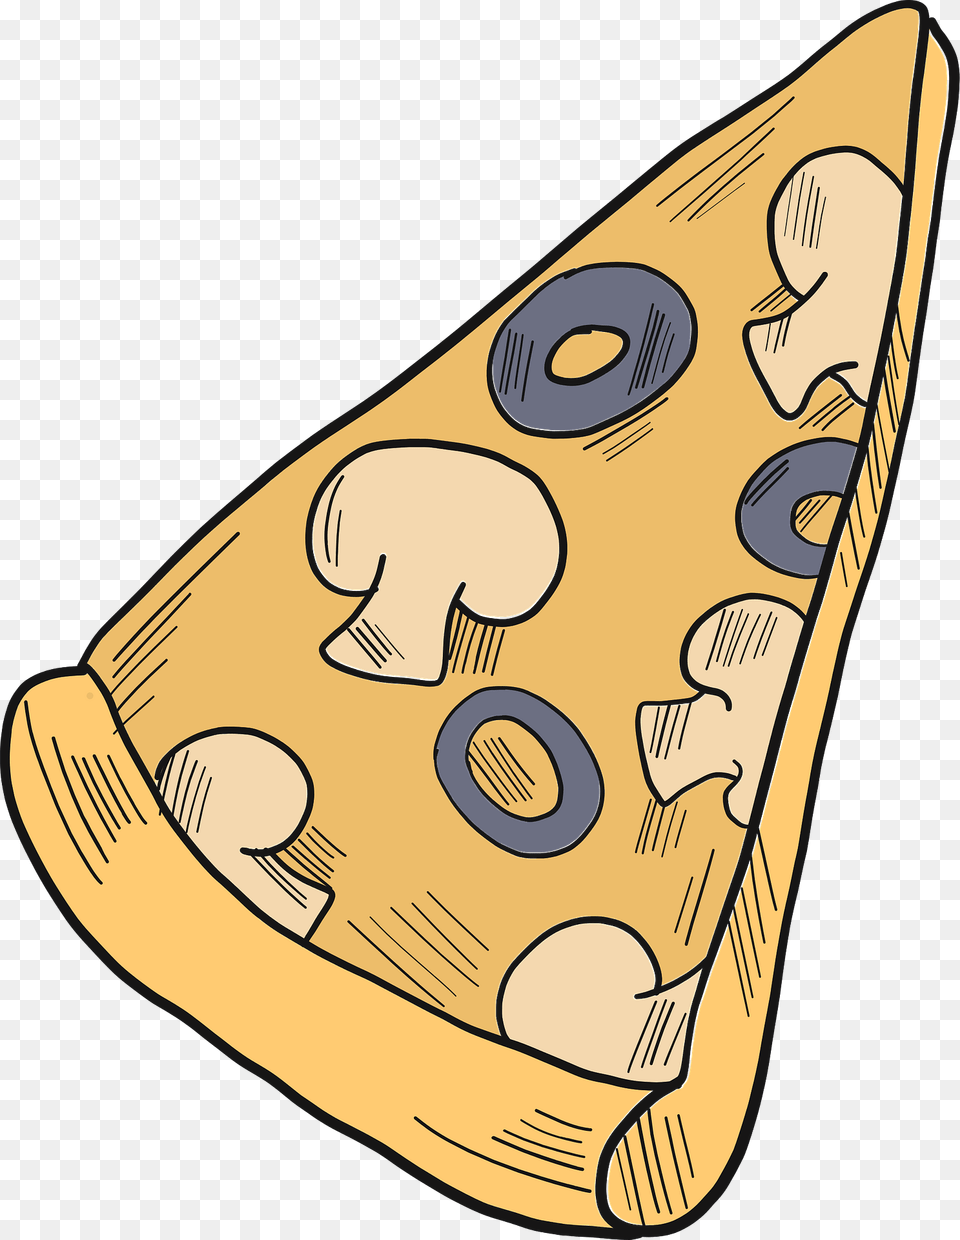 Slice Of Pizza Clipart, Clothing, Hat, Boat, Transportation Png